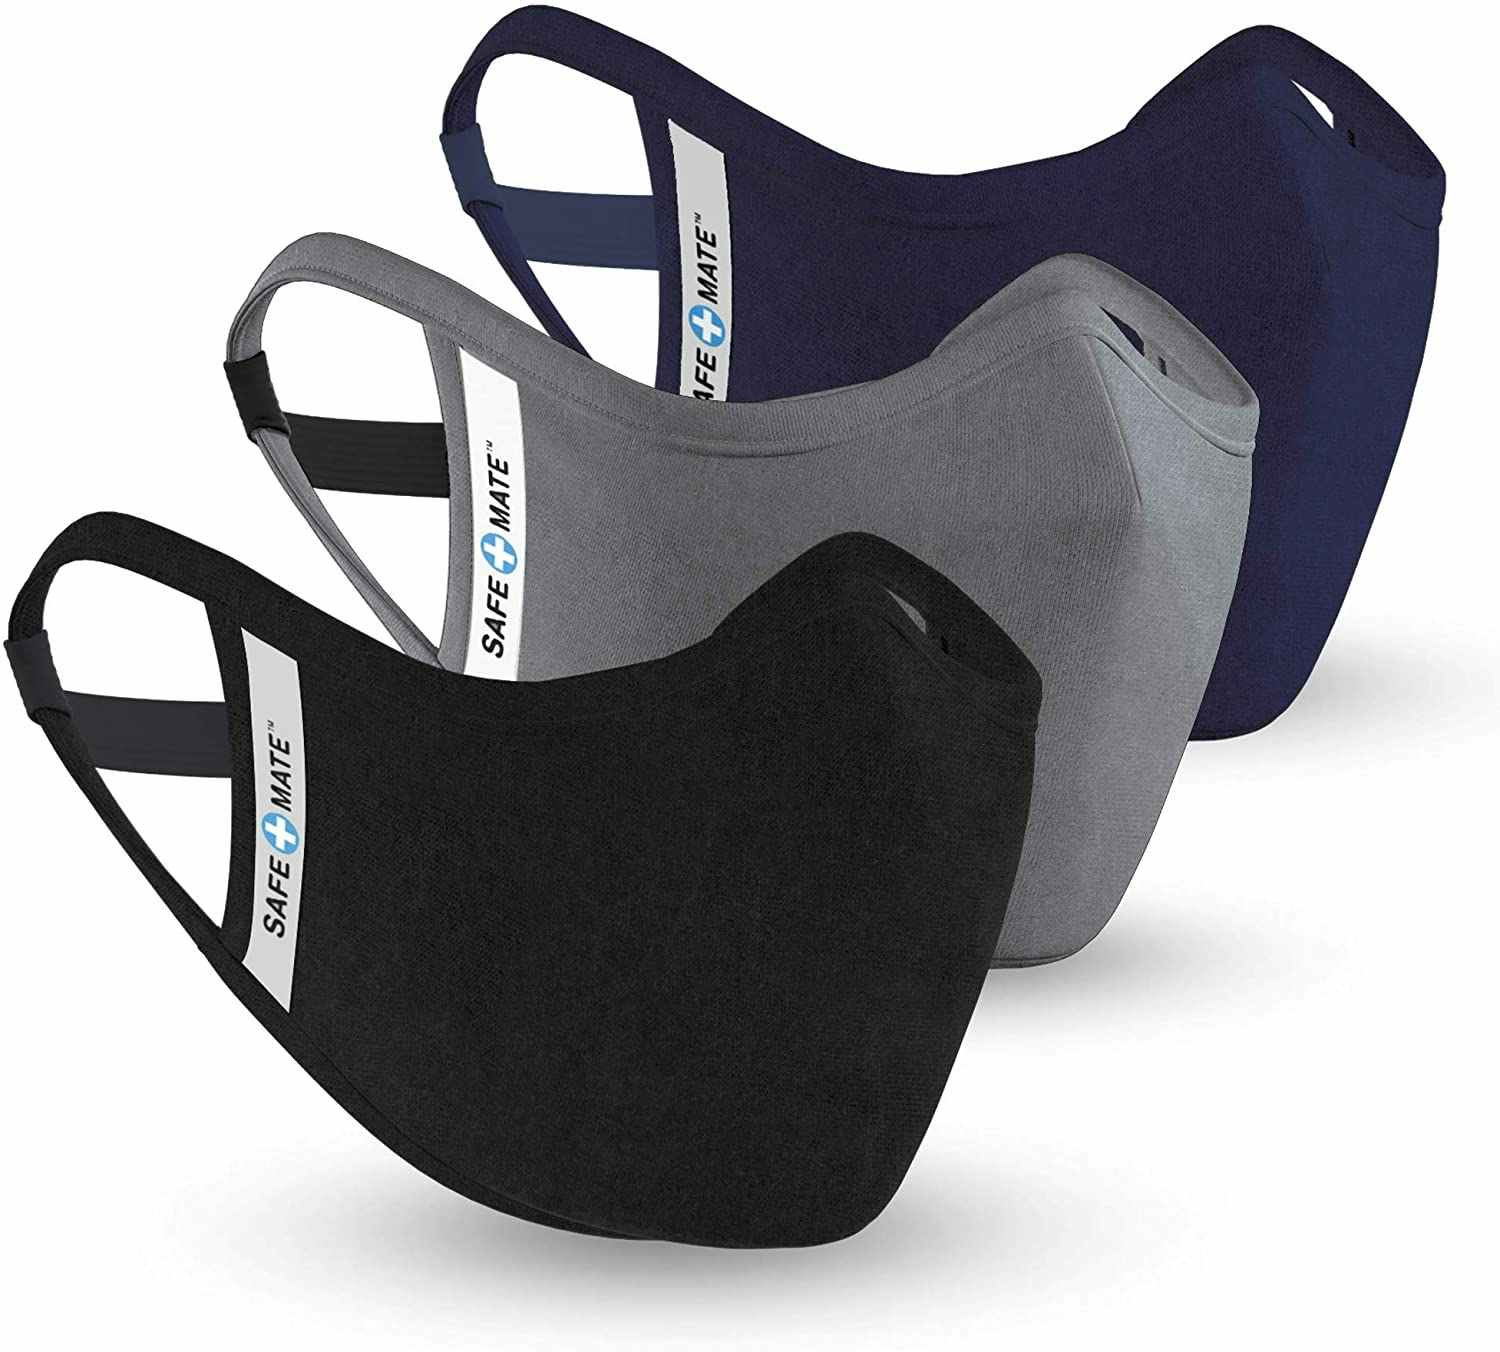 A pack of three Case Mate face masks in black, gray, and navy.